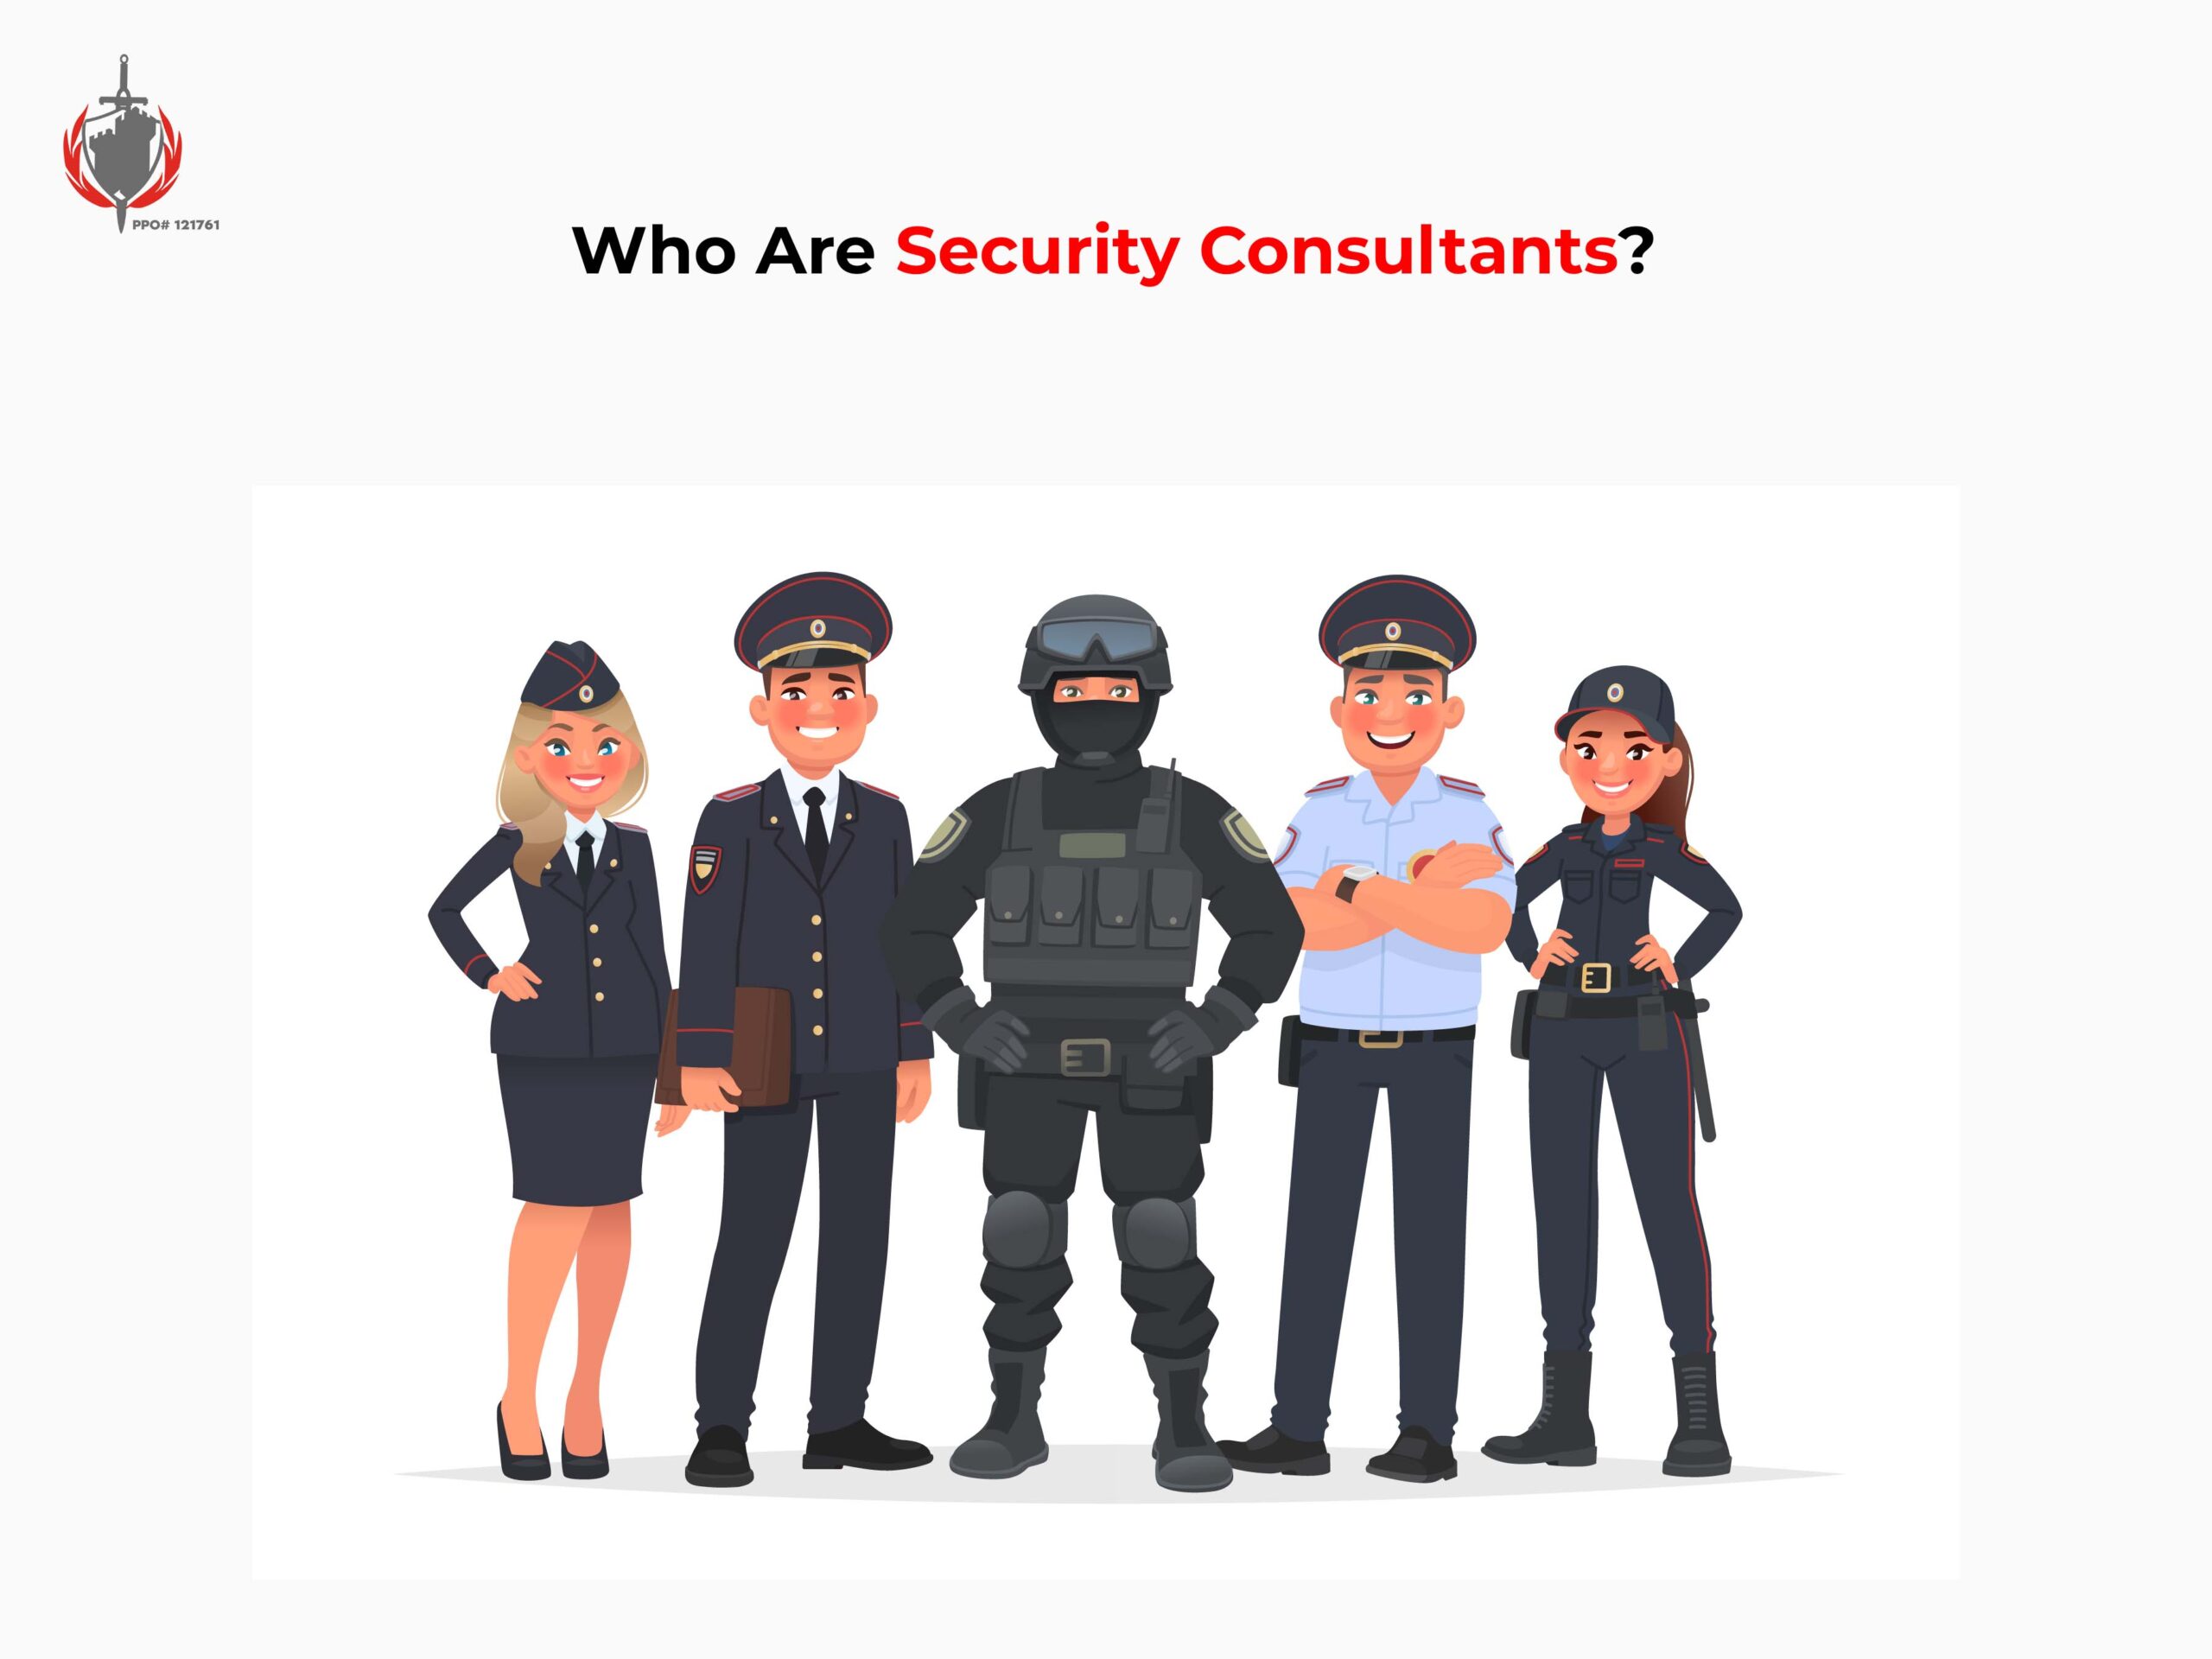 Who Are Security Consultants?